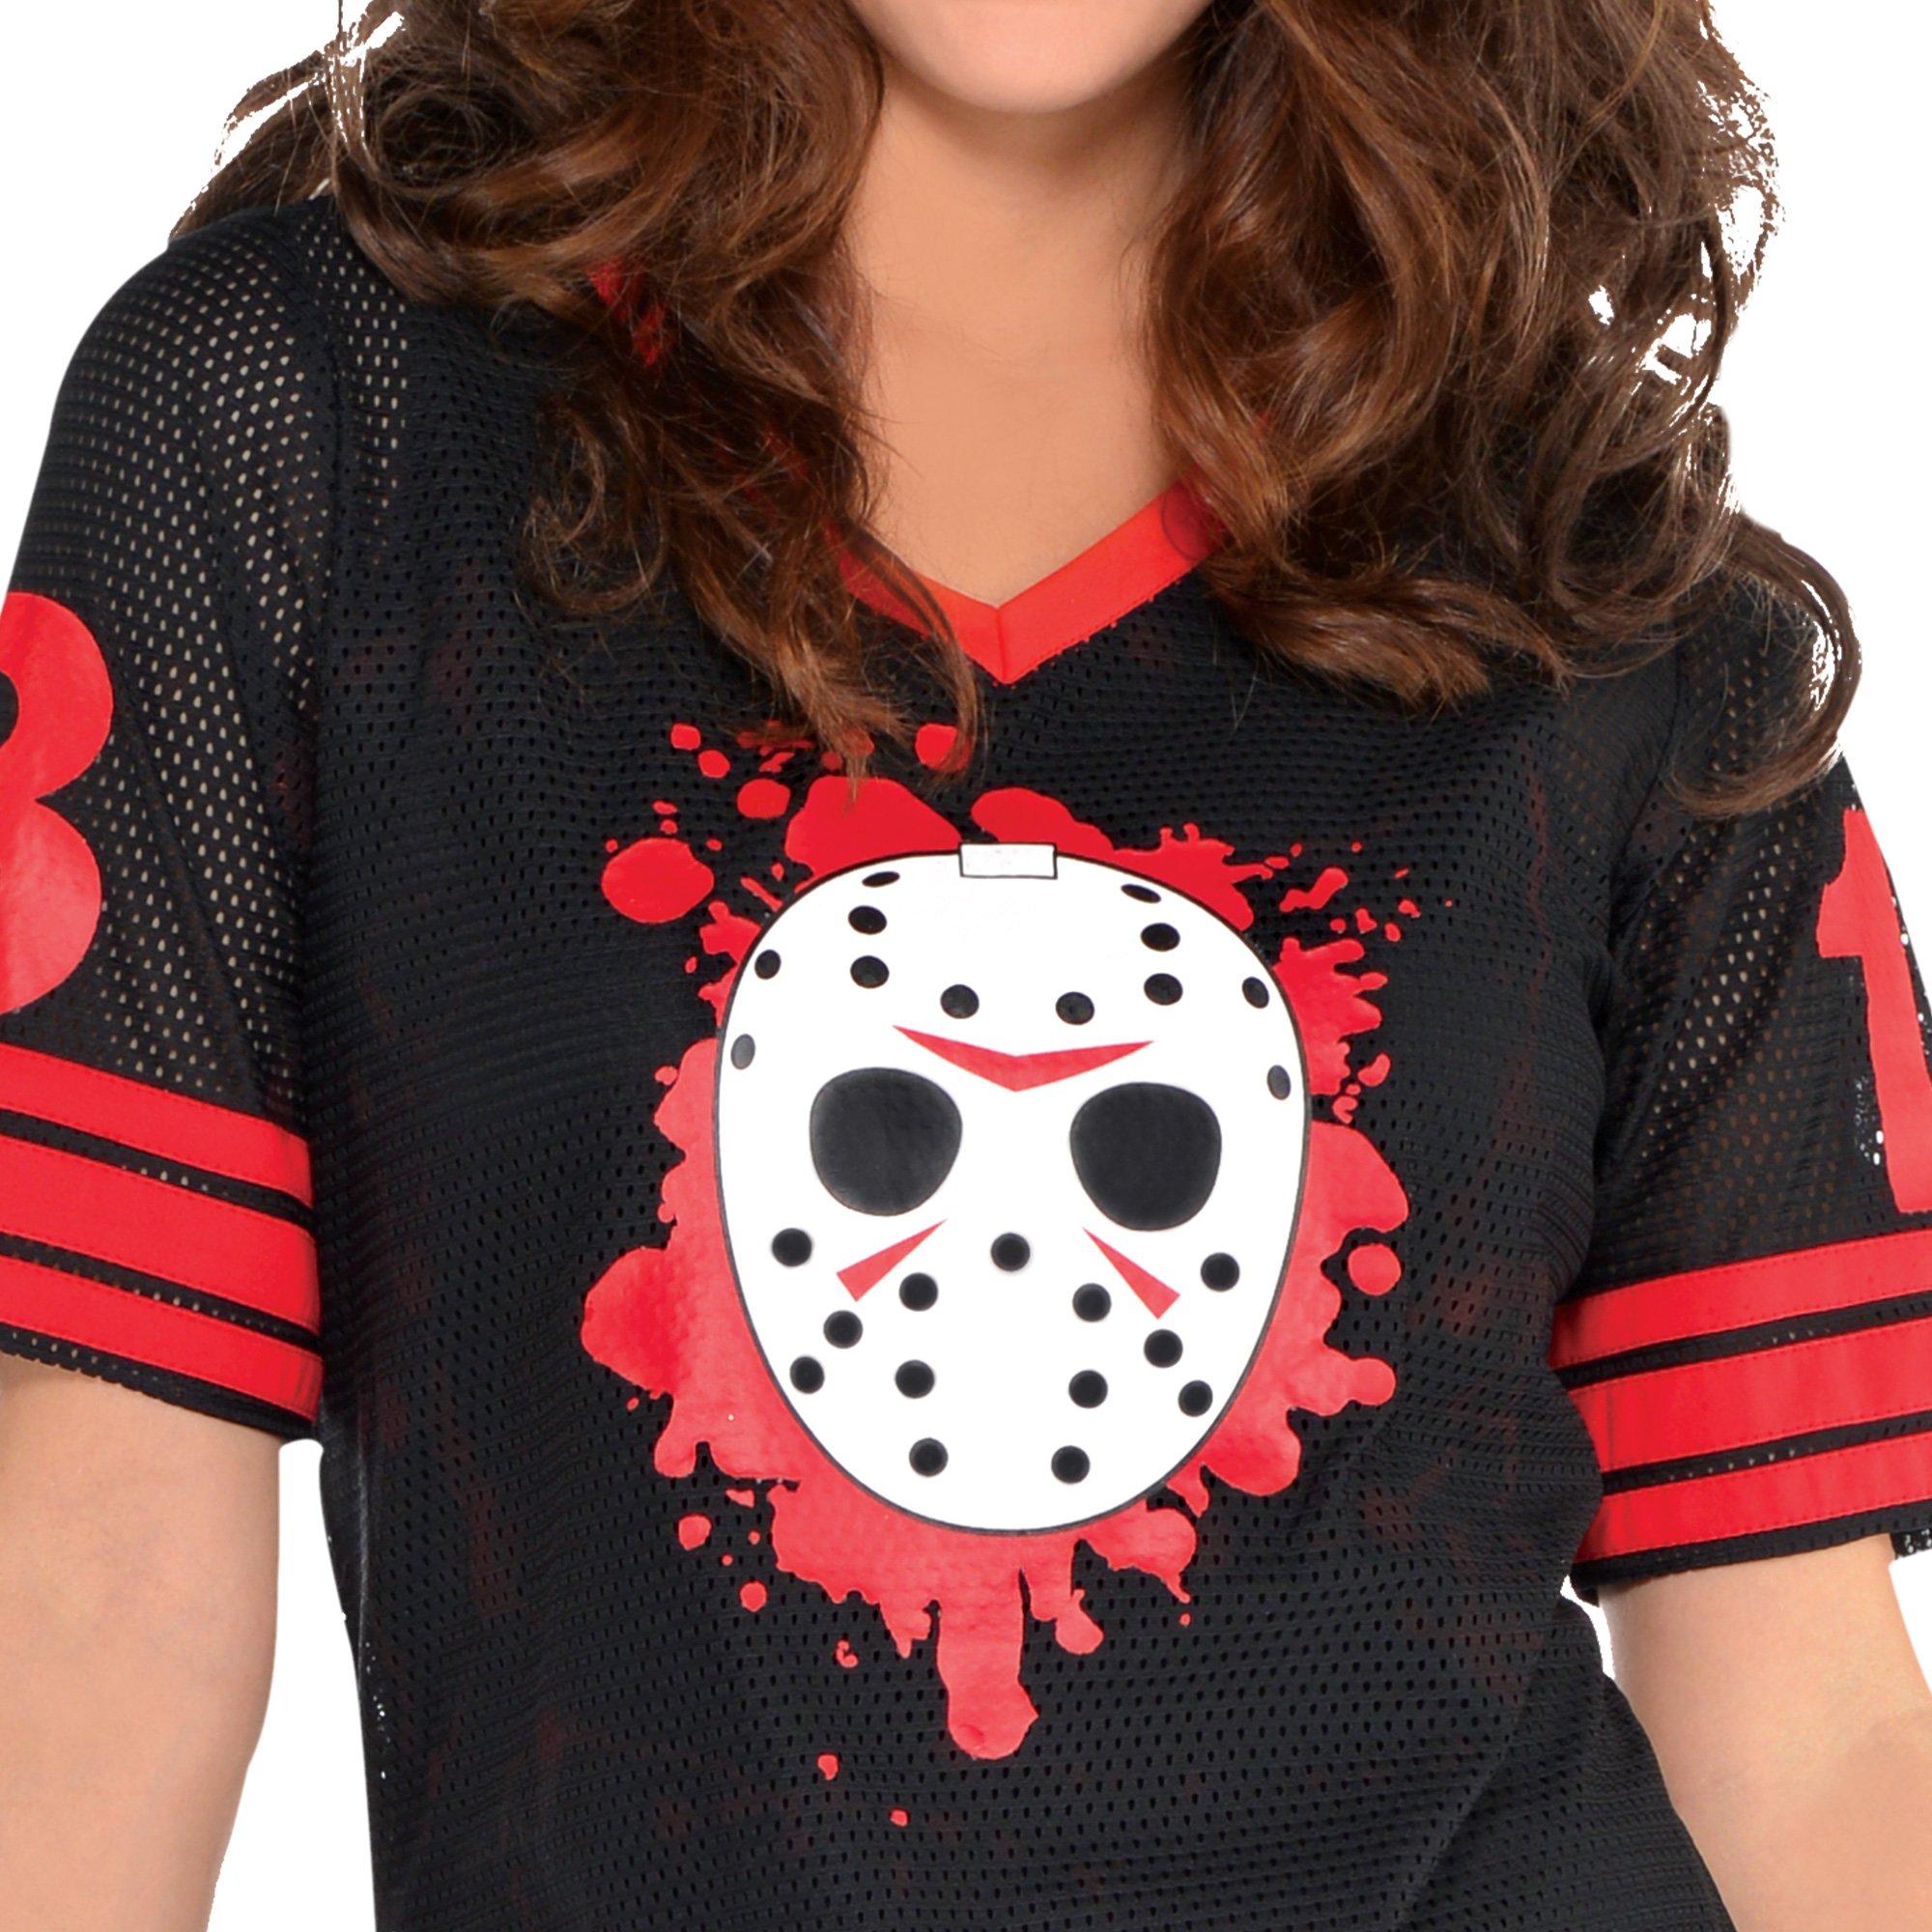 Adult Miss Voorhees Costume - Friday the 13th